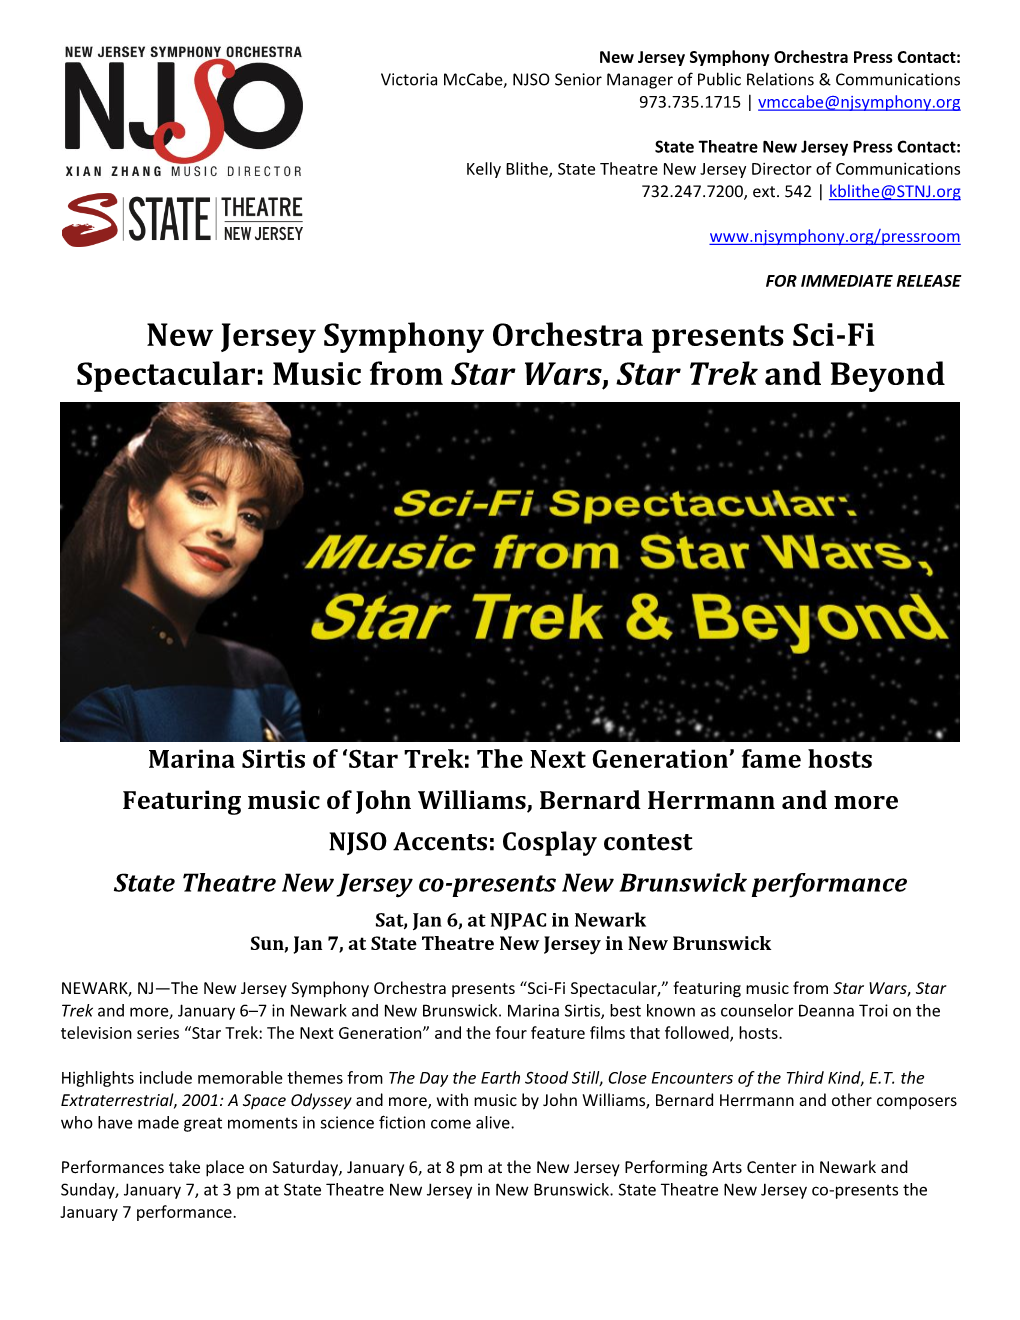 New Jersey Symphony Orchestra Presents Sci-Fi Spectacular: Music from Star Wars, Star Trek and Beyond